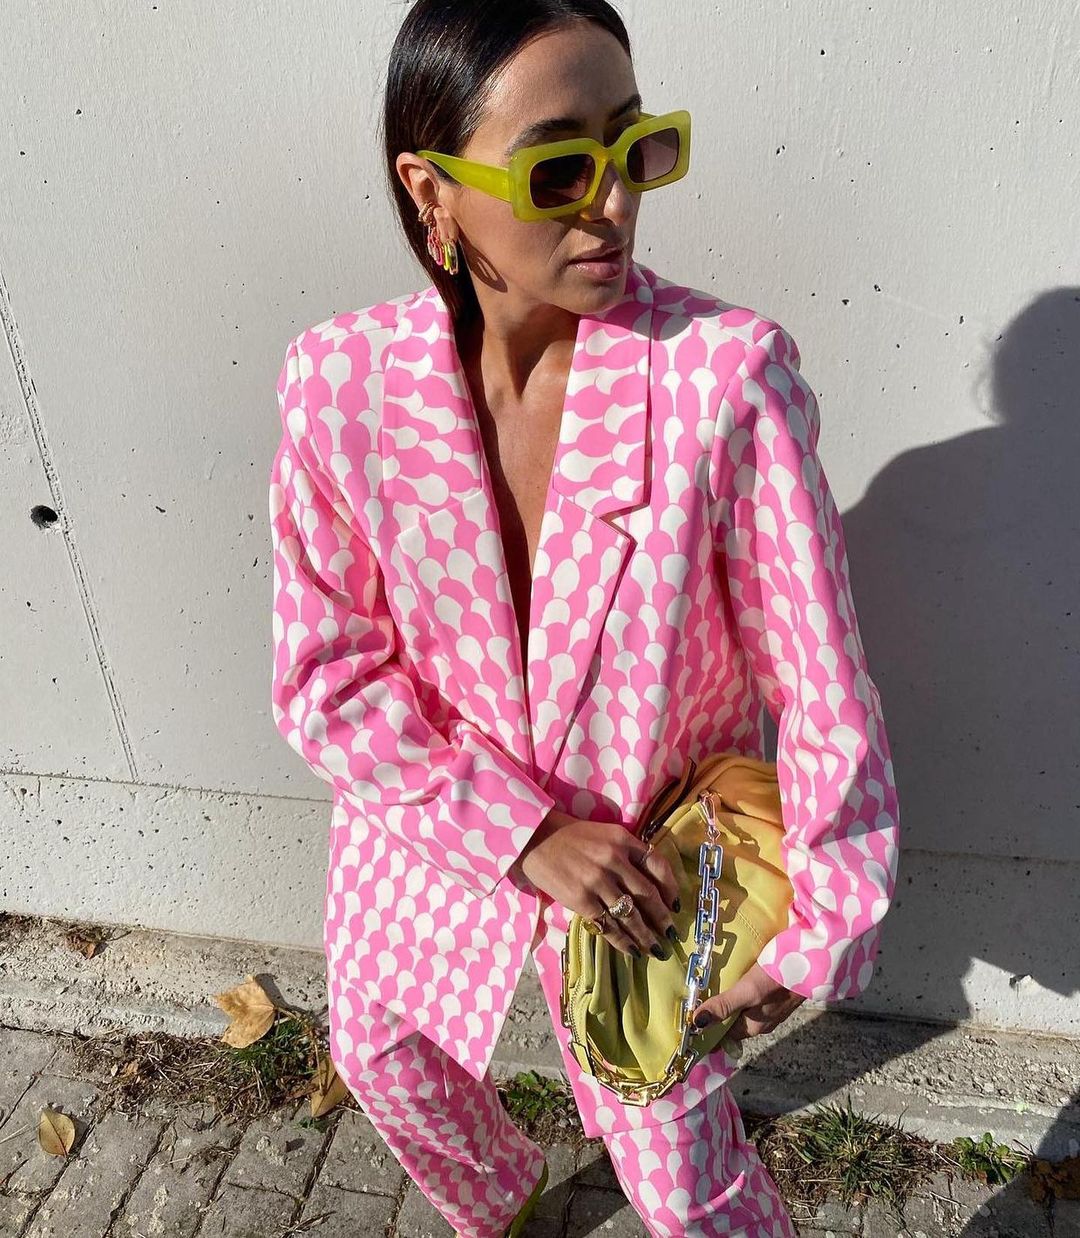 Pink-white patterned suit